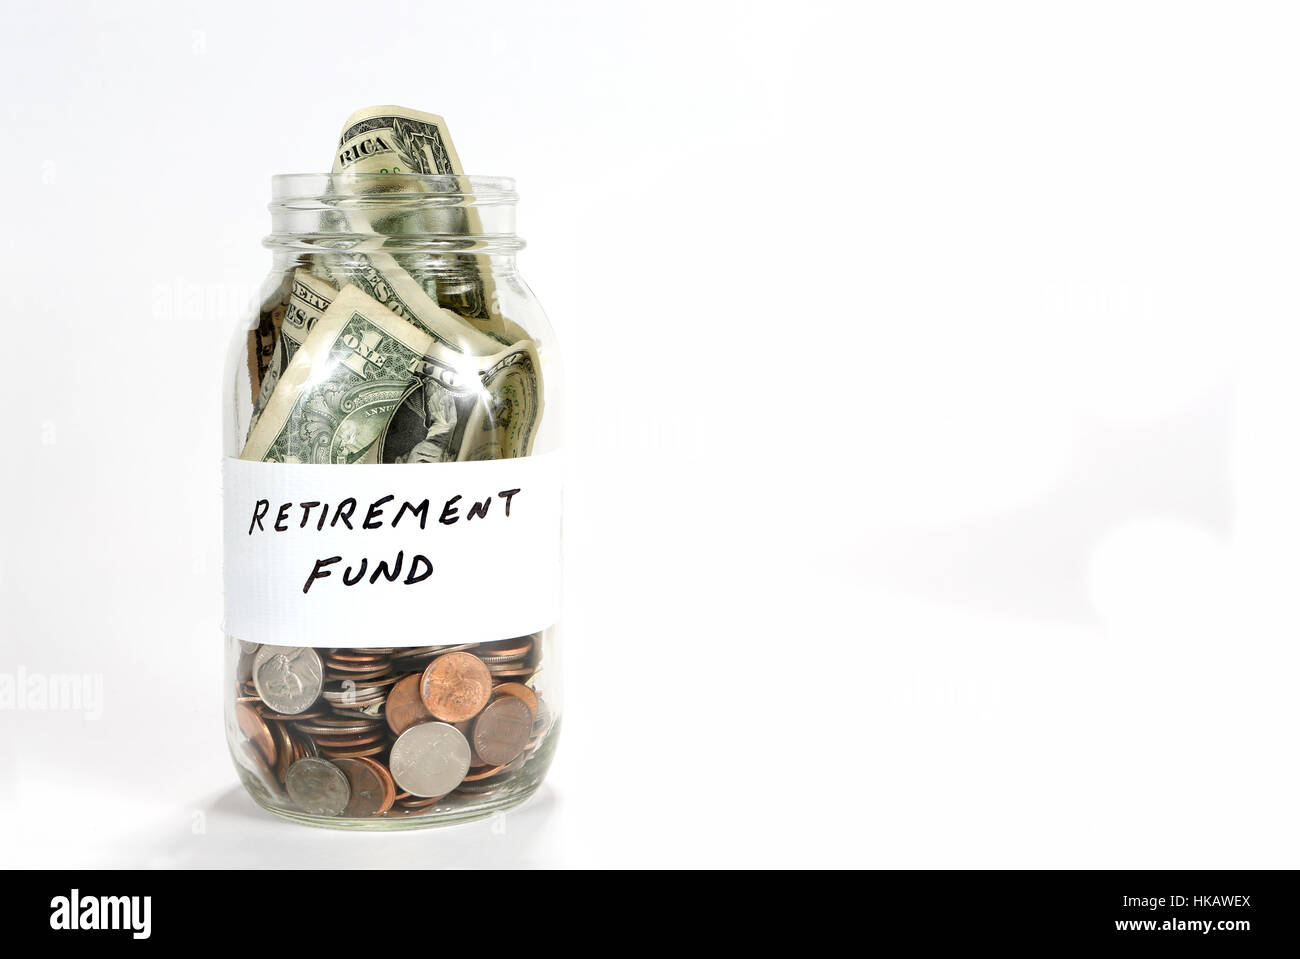 Clear glass jar holds money for retirement fund. Stock Photo